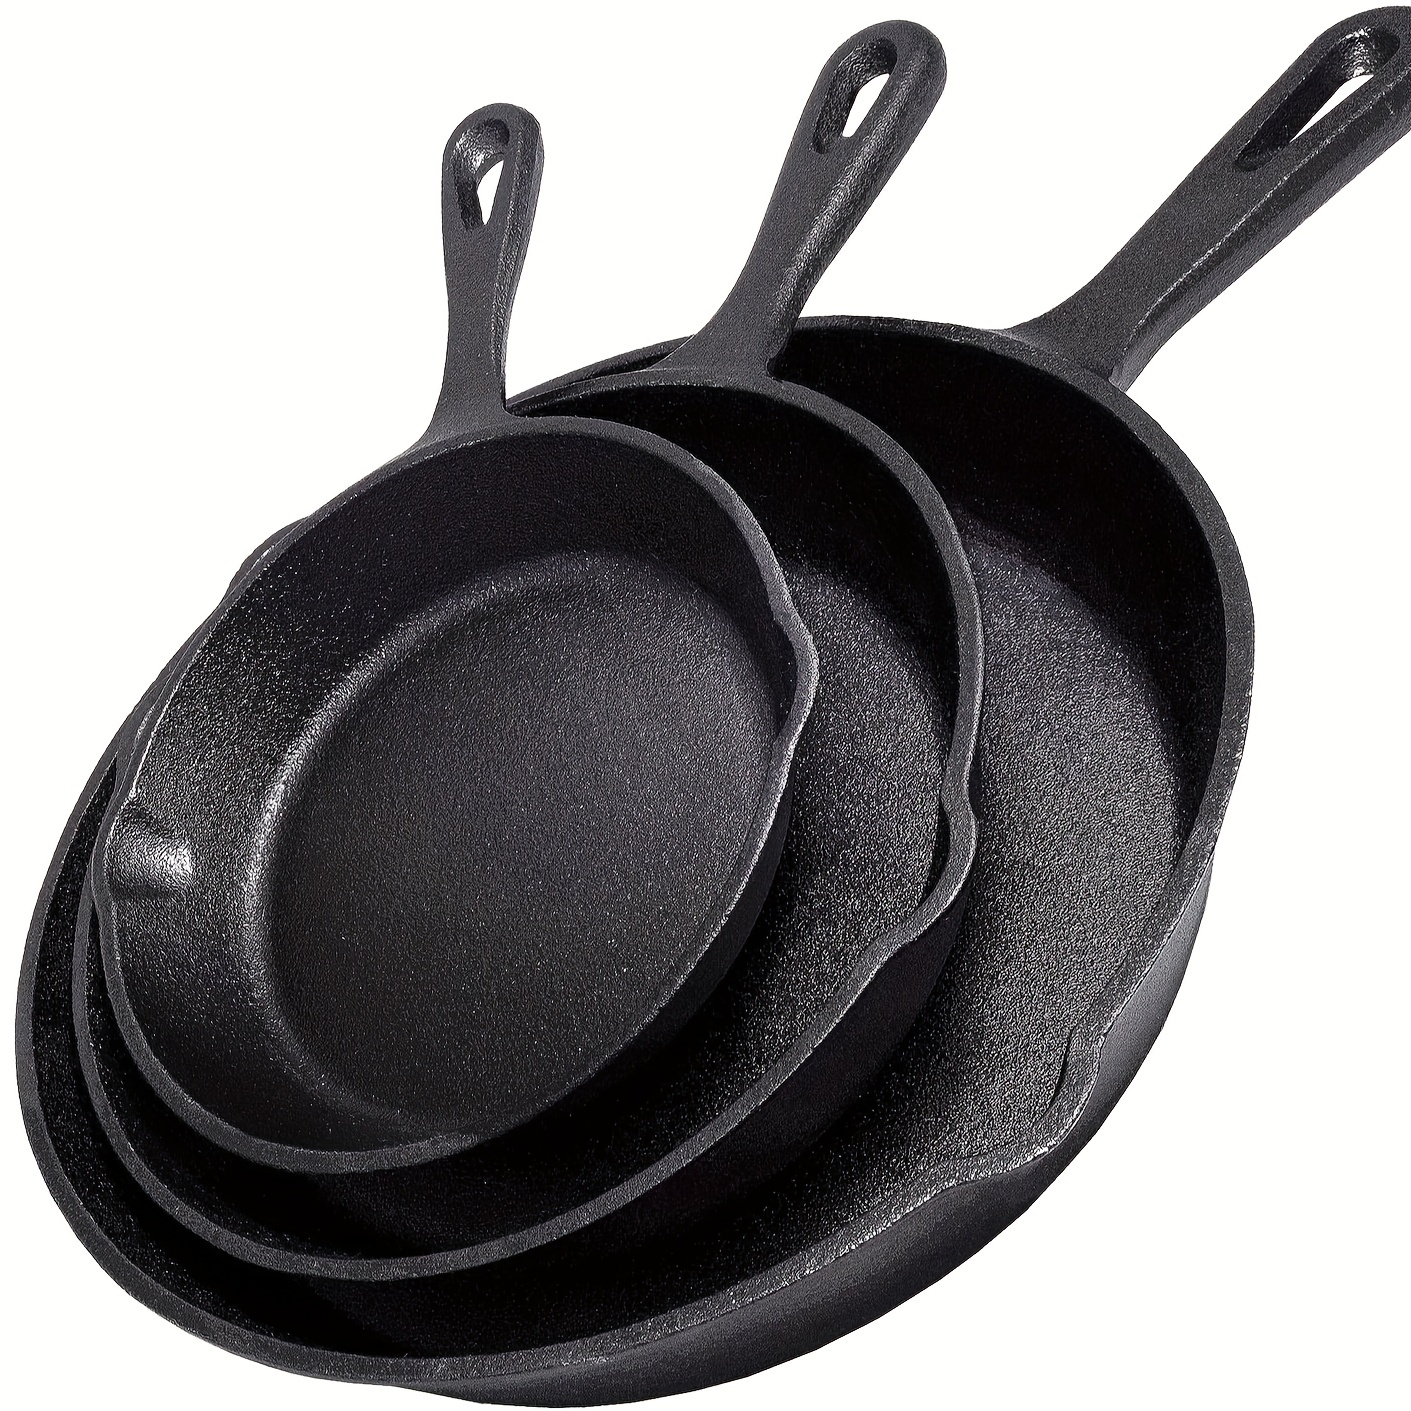 Cast Iron Skillet, Pre-seasoned Oven Safe Frying Pan (10.63inch